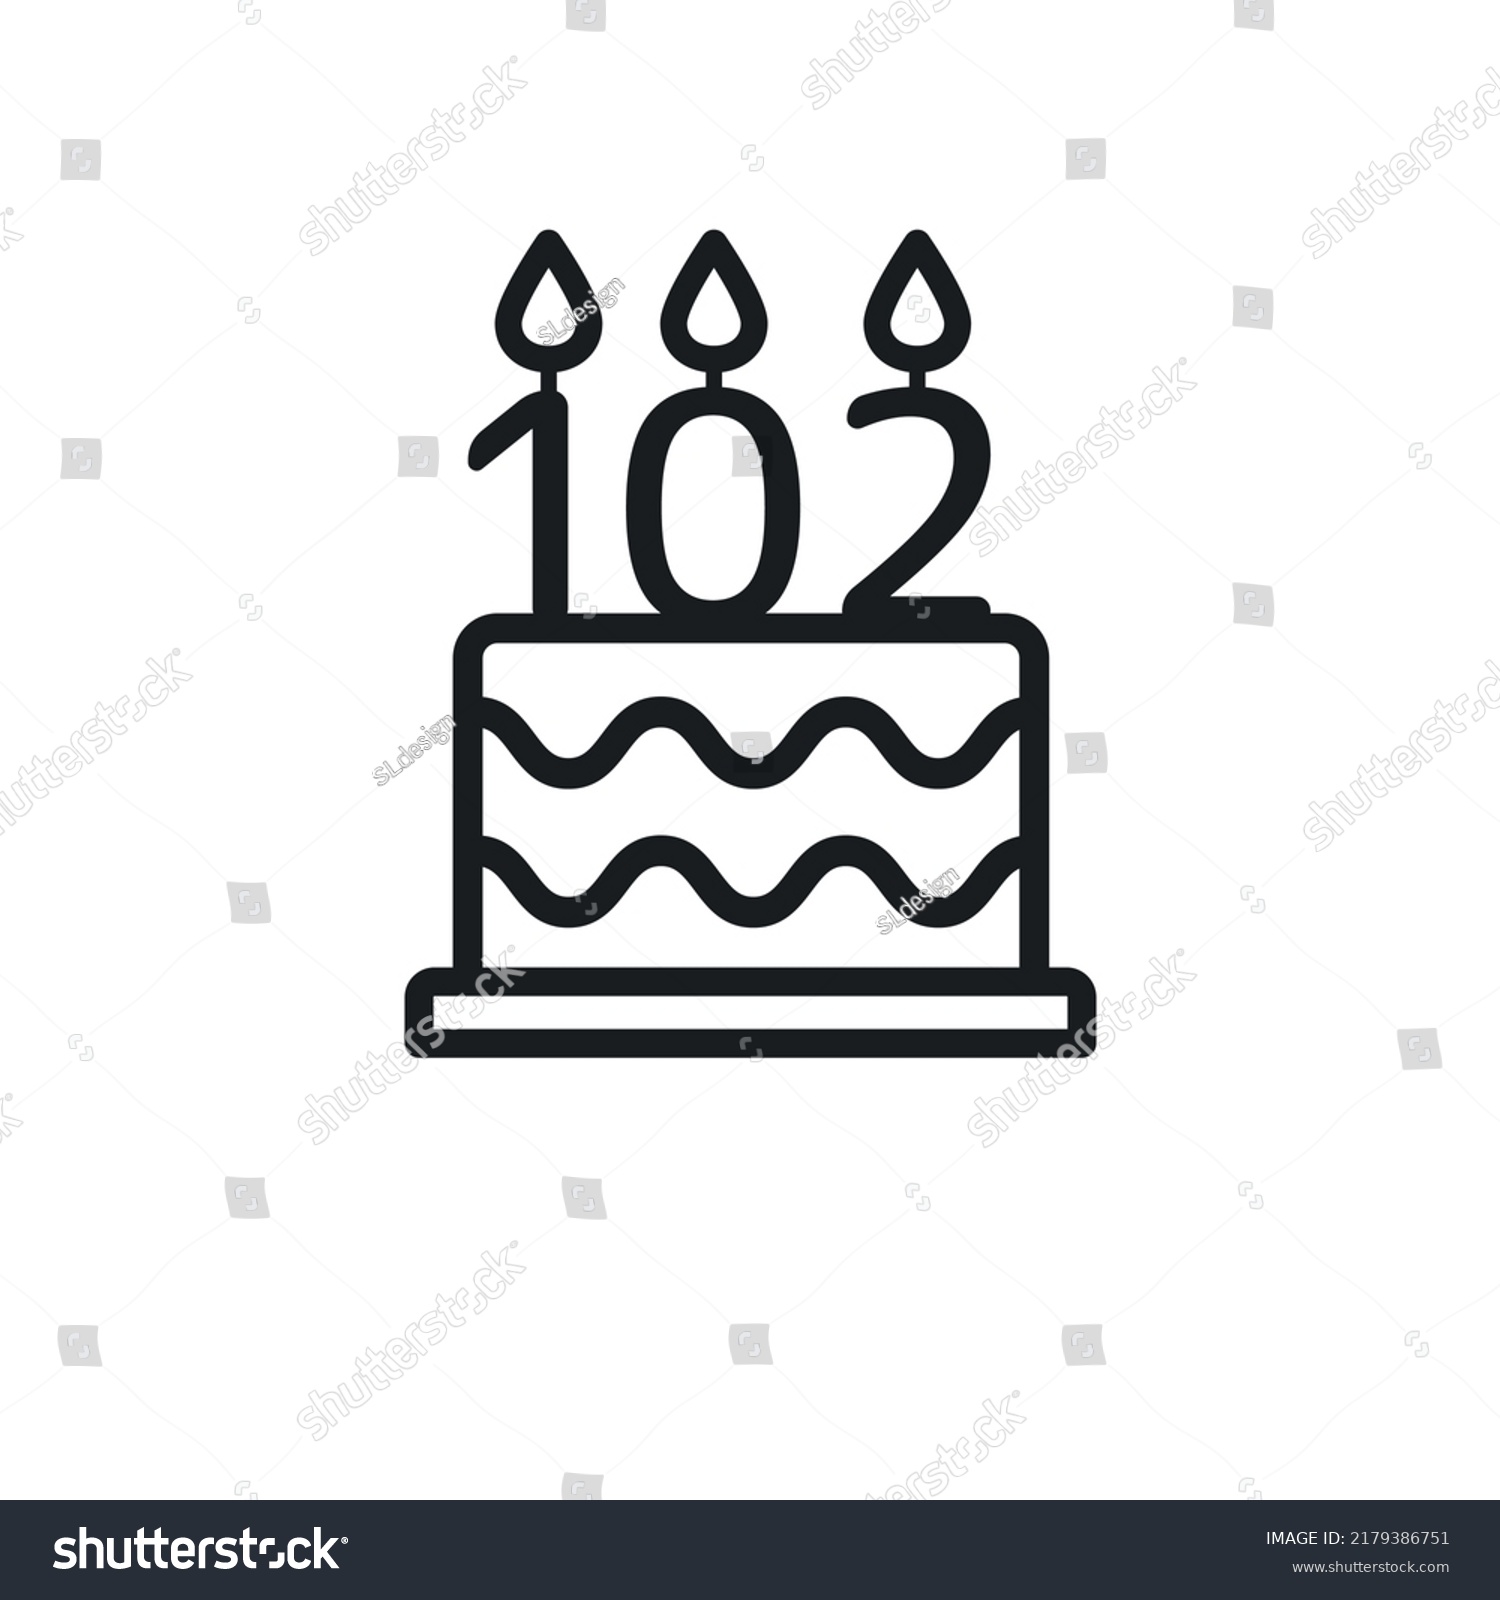 SVG of Birthday cake line icon with candle number 102 (one hundred and two). Vector. svg